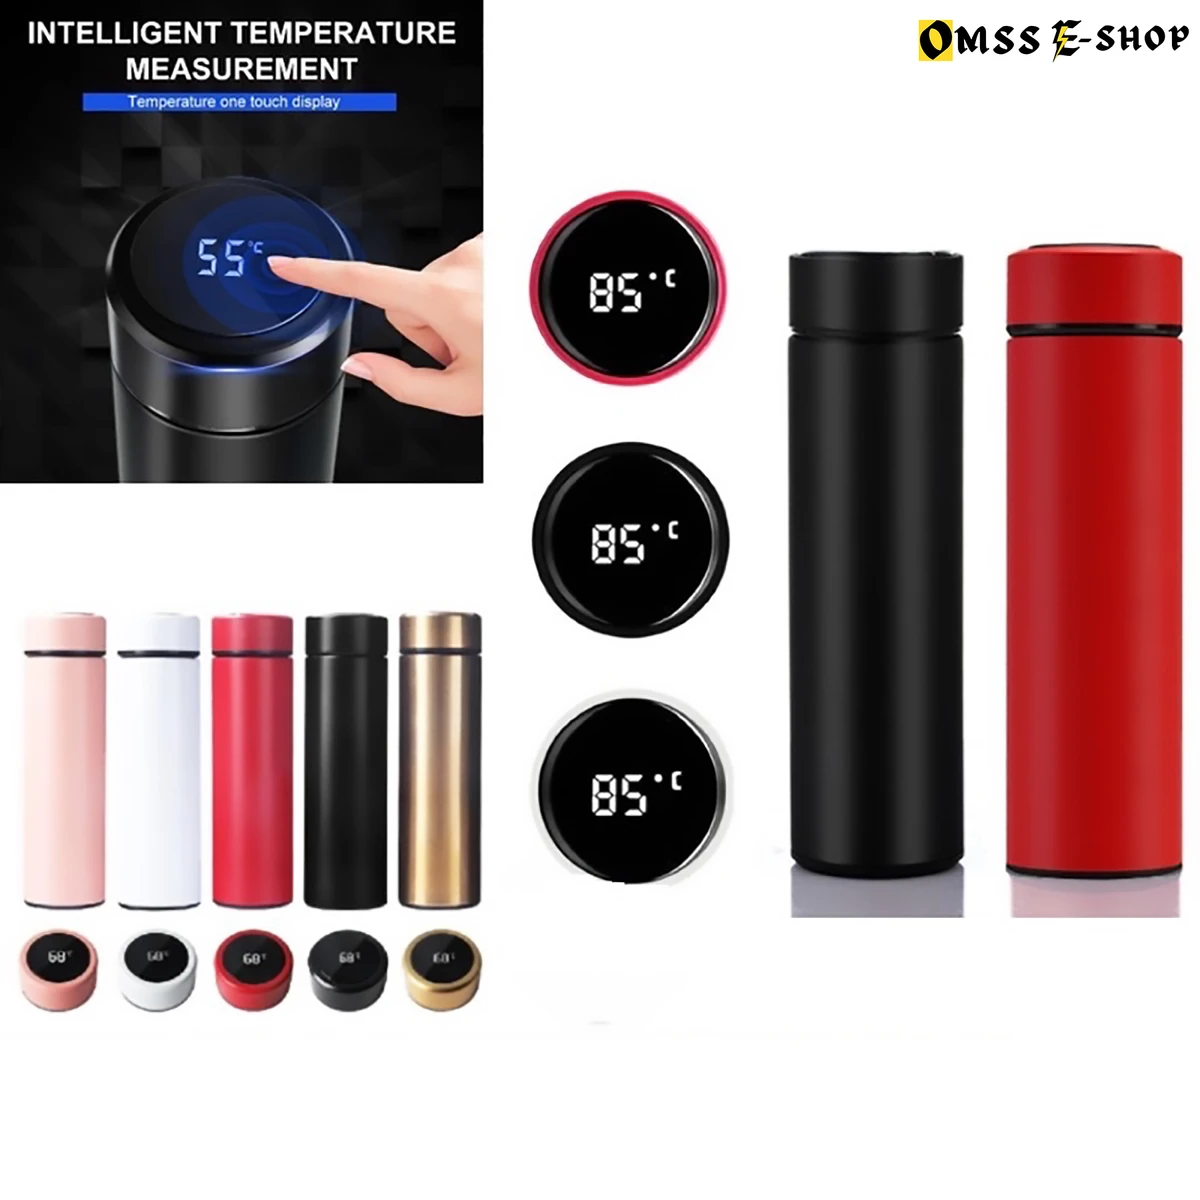 500Ml Smart Thermos Cup, Led Temperature Display Water Bottle, Stainless Steel Vacuum Travel Mug For 24 Hours, Hot And Cold Tea Coffee Vacuum Thermoses Cup For School, Home, Office